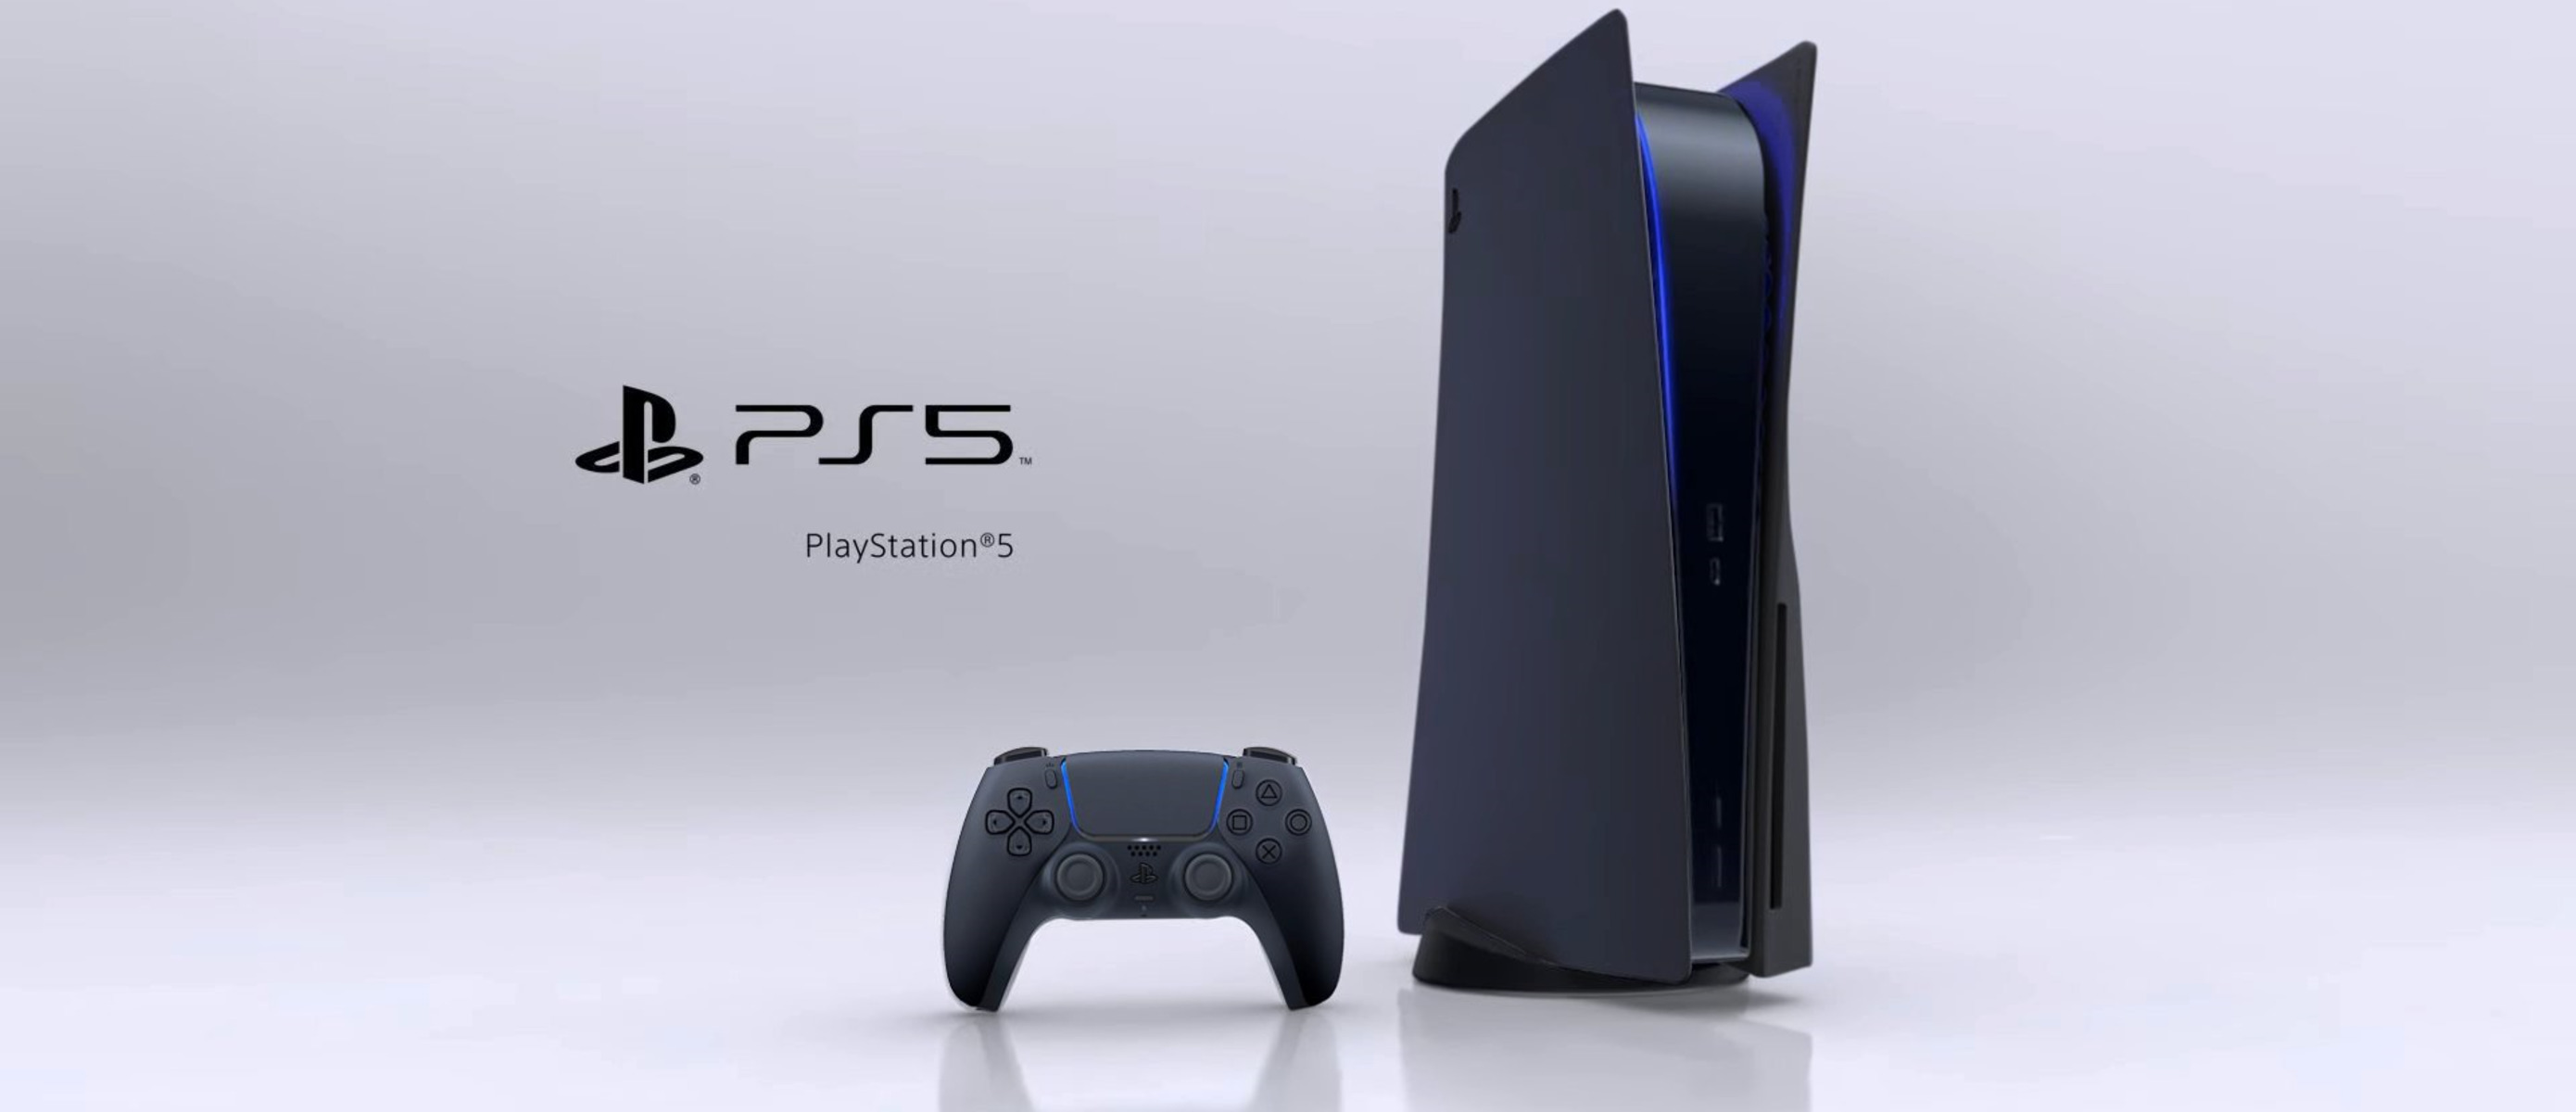 Ps5 premium. Консоль сони плейстейшен 5. Sony ps5. Sony PLAYSTATION ps5. Sony PLAYSTATION 5. PS 5.